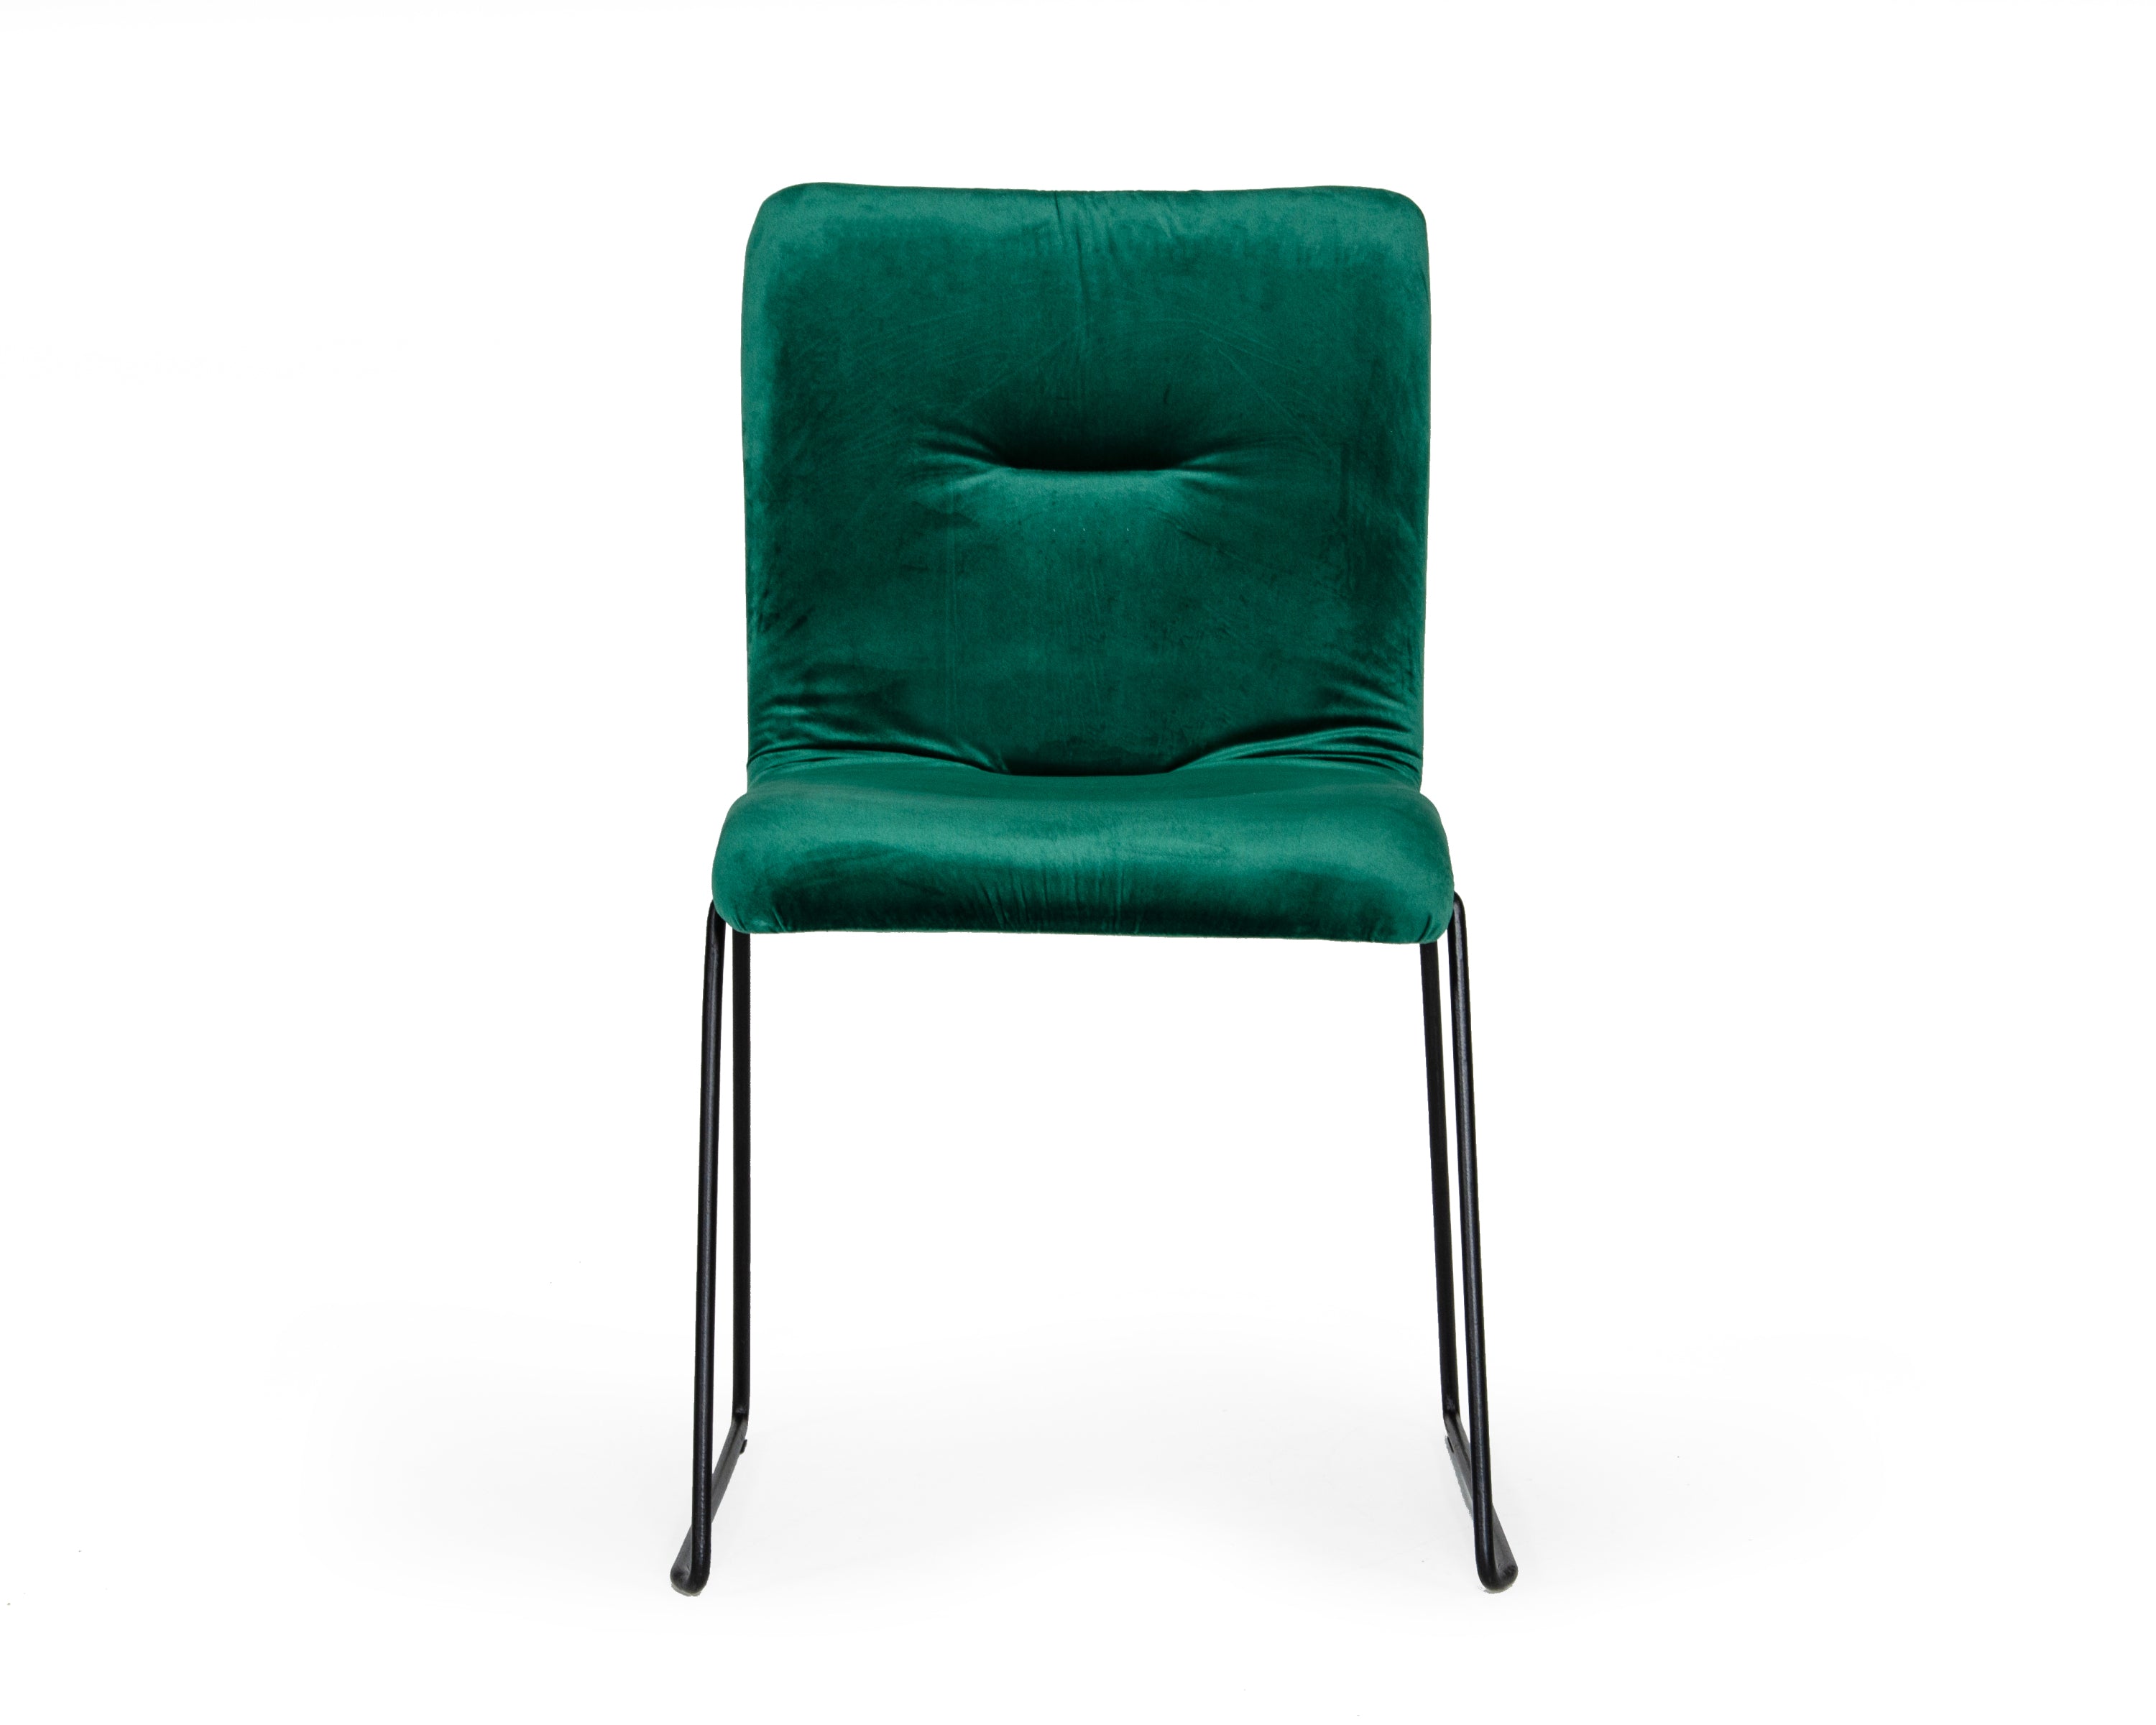 Set of 2 Green Chairs